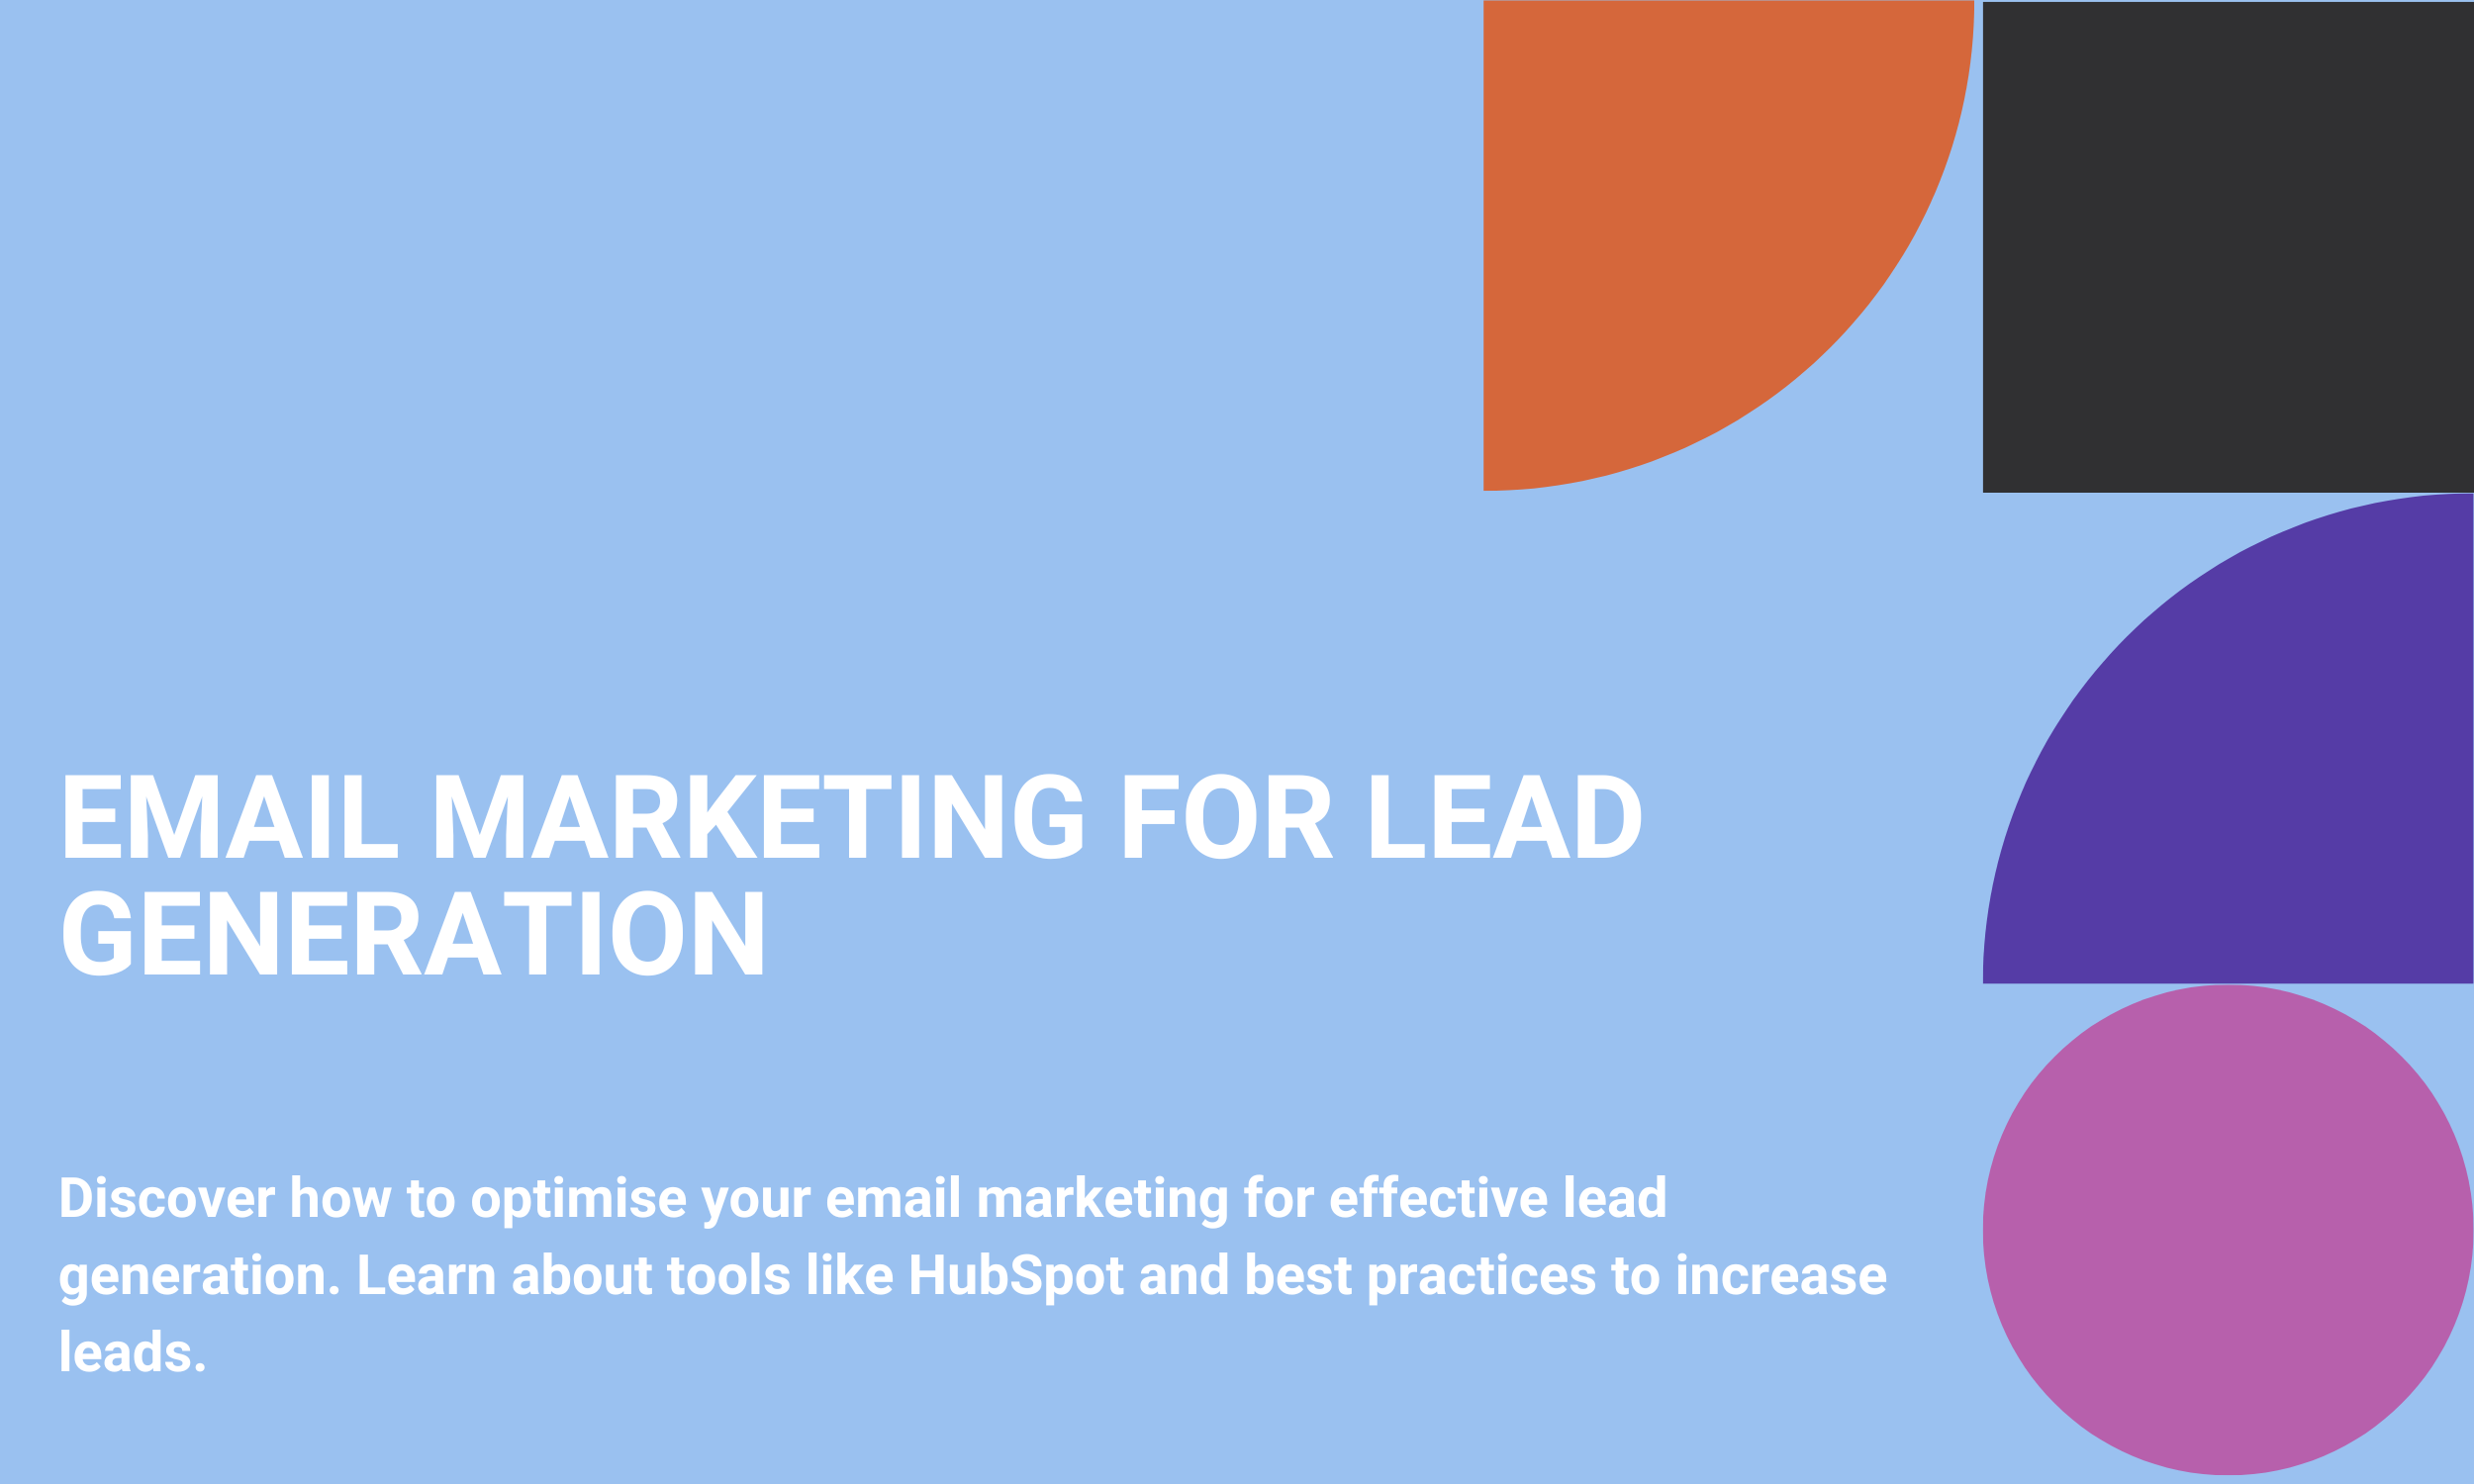 Email Marketing for Lead Generation